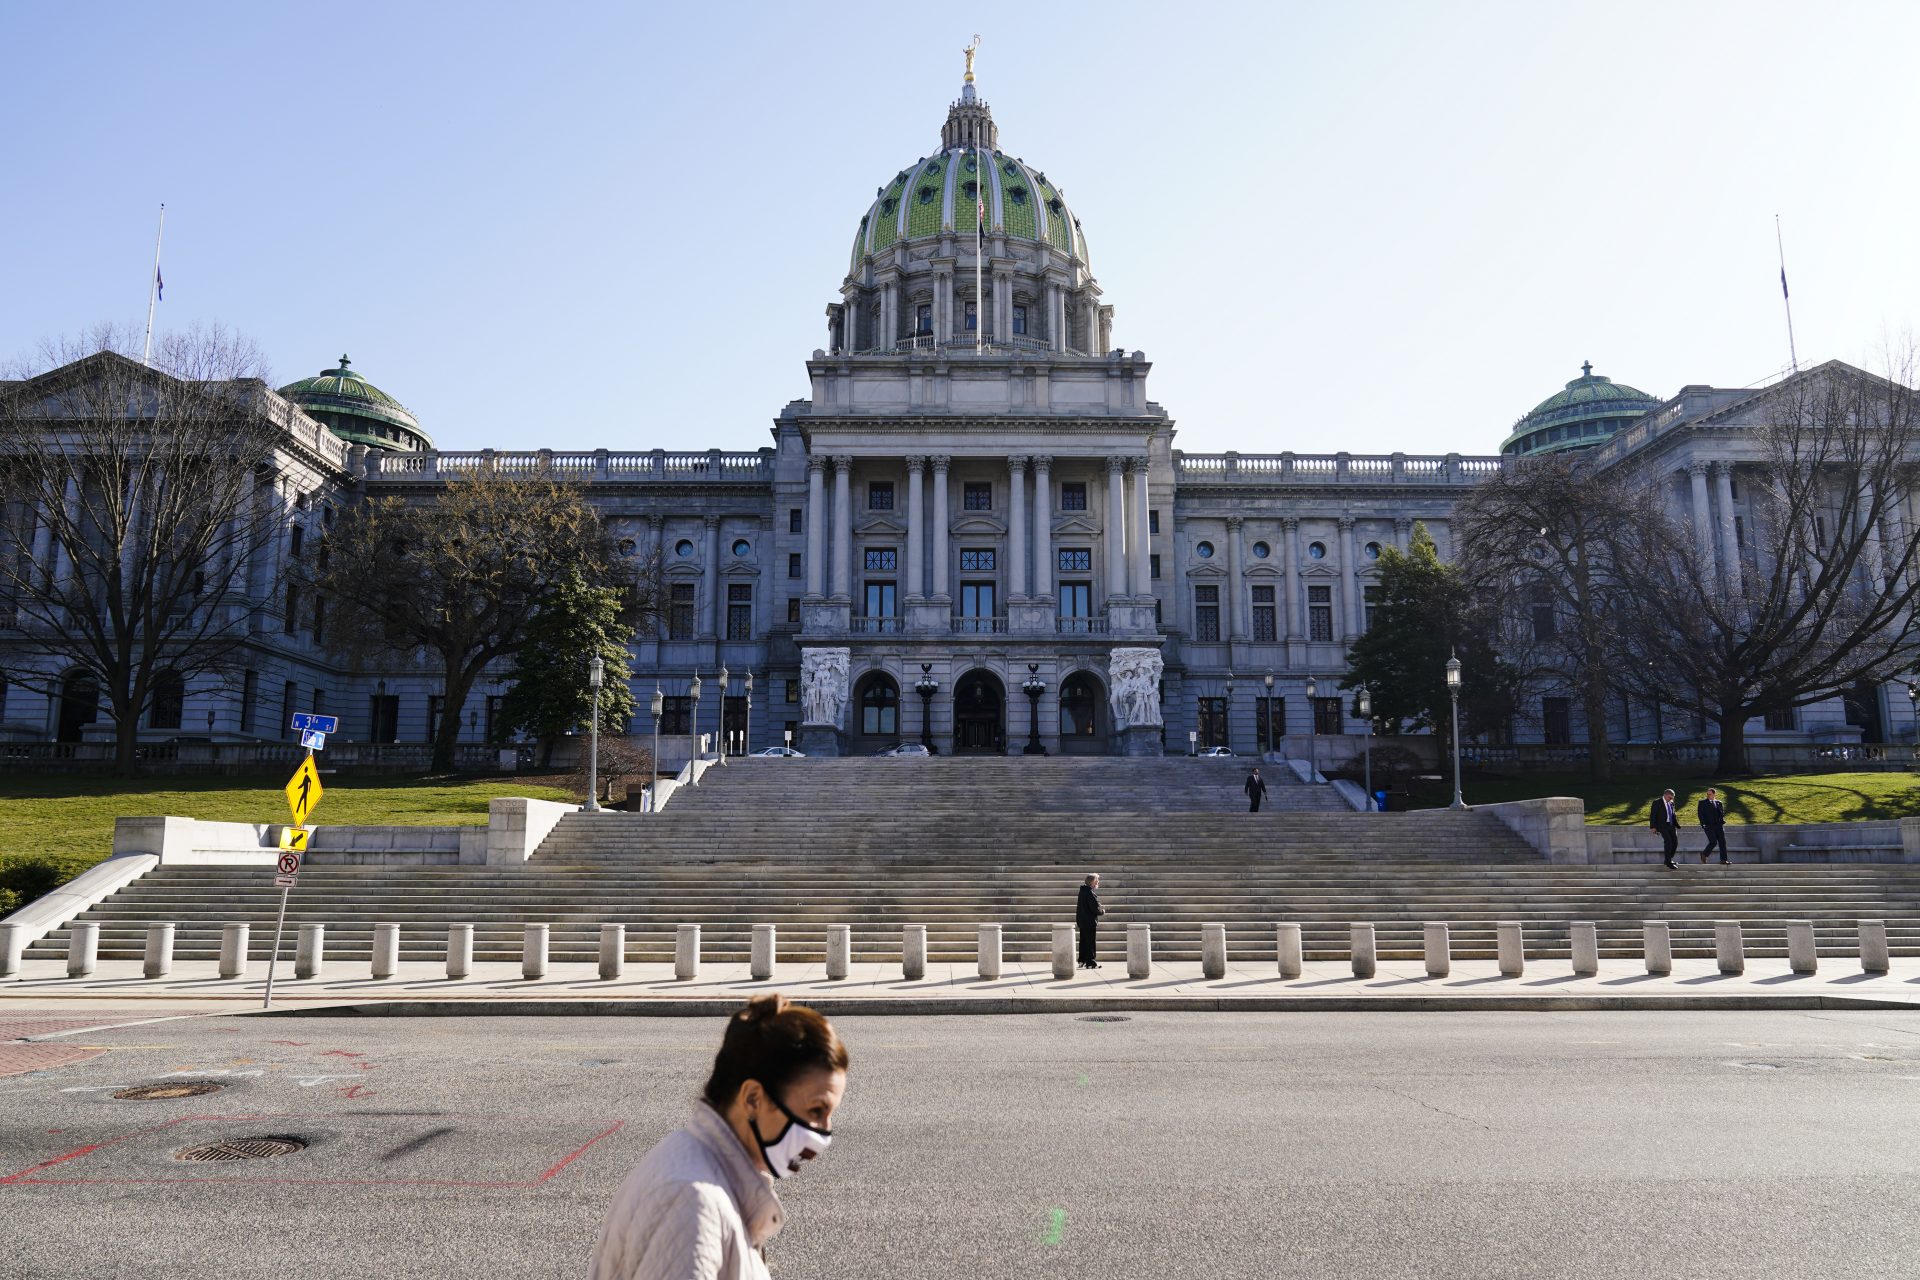 A pedestrian walks past the Pennsylvania Capitol in Harrisburg, Pa., Monday, March 22, 2021. The Capitol building reopened to the public this month for the first time since December, albeit with social-distancing requirements, no events scheduled inside and a stepped-up police presence following the Jan. 6 attack on the U.S. Capitol.